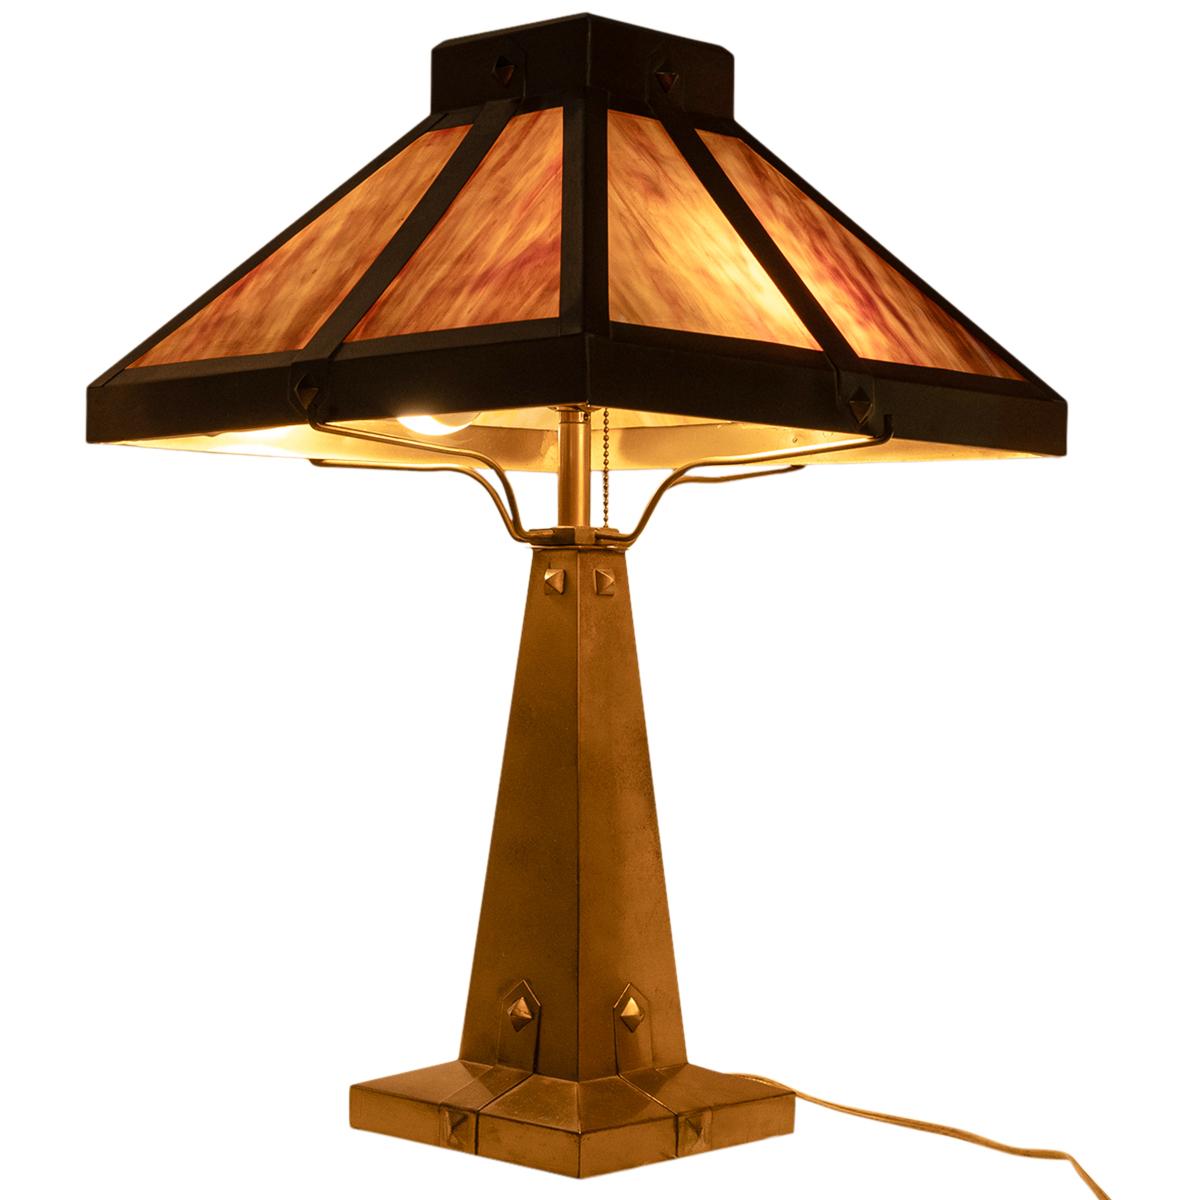 AS very good antique American Arts & Crafts, Mission, brass & slag glass table lamp, circa 1910.
This very handsome twin light Mission lamp having a brass and variegated caramel & cream four panel slag glass shade, raised upon a corresponding brass